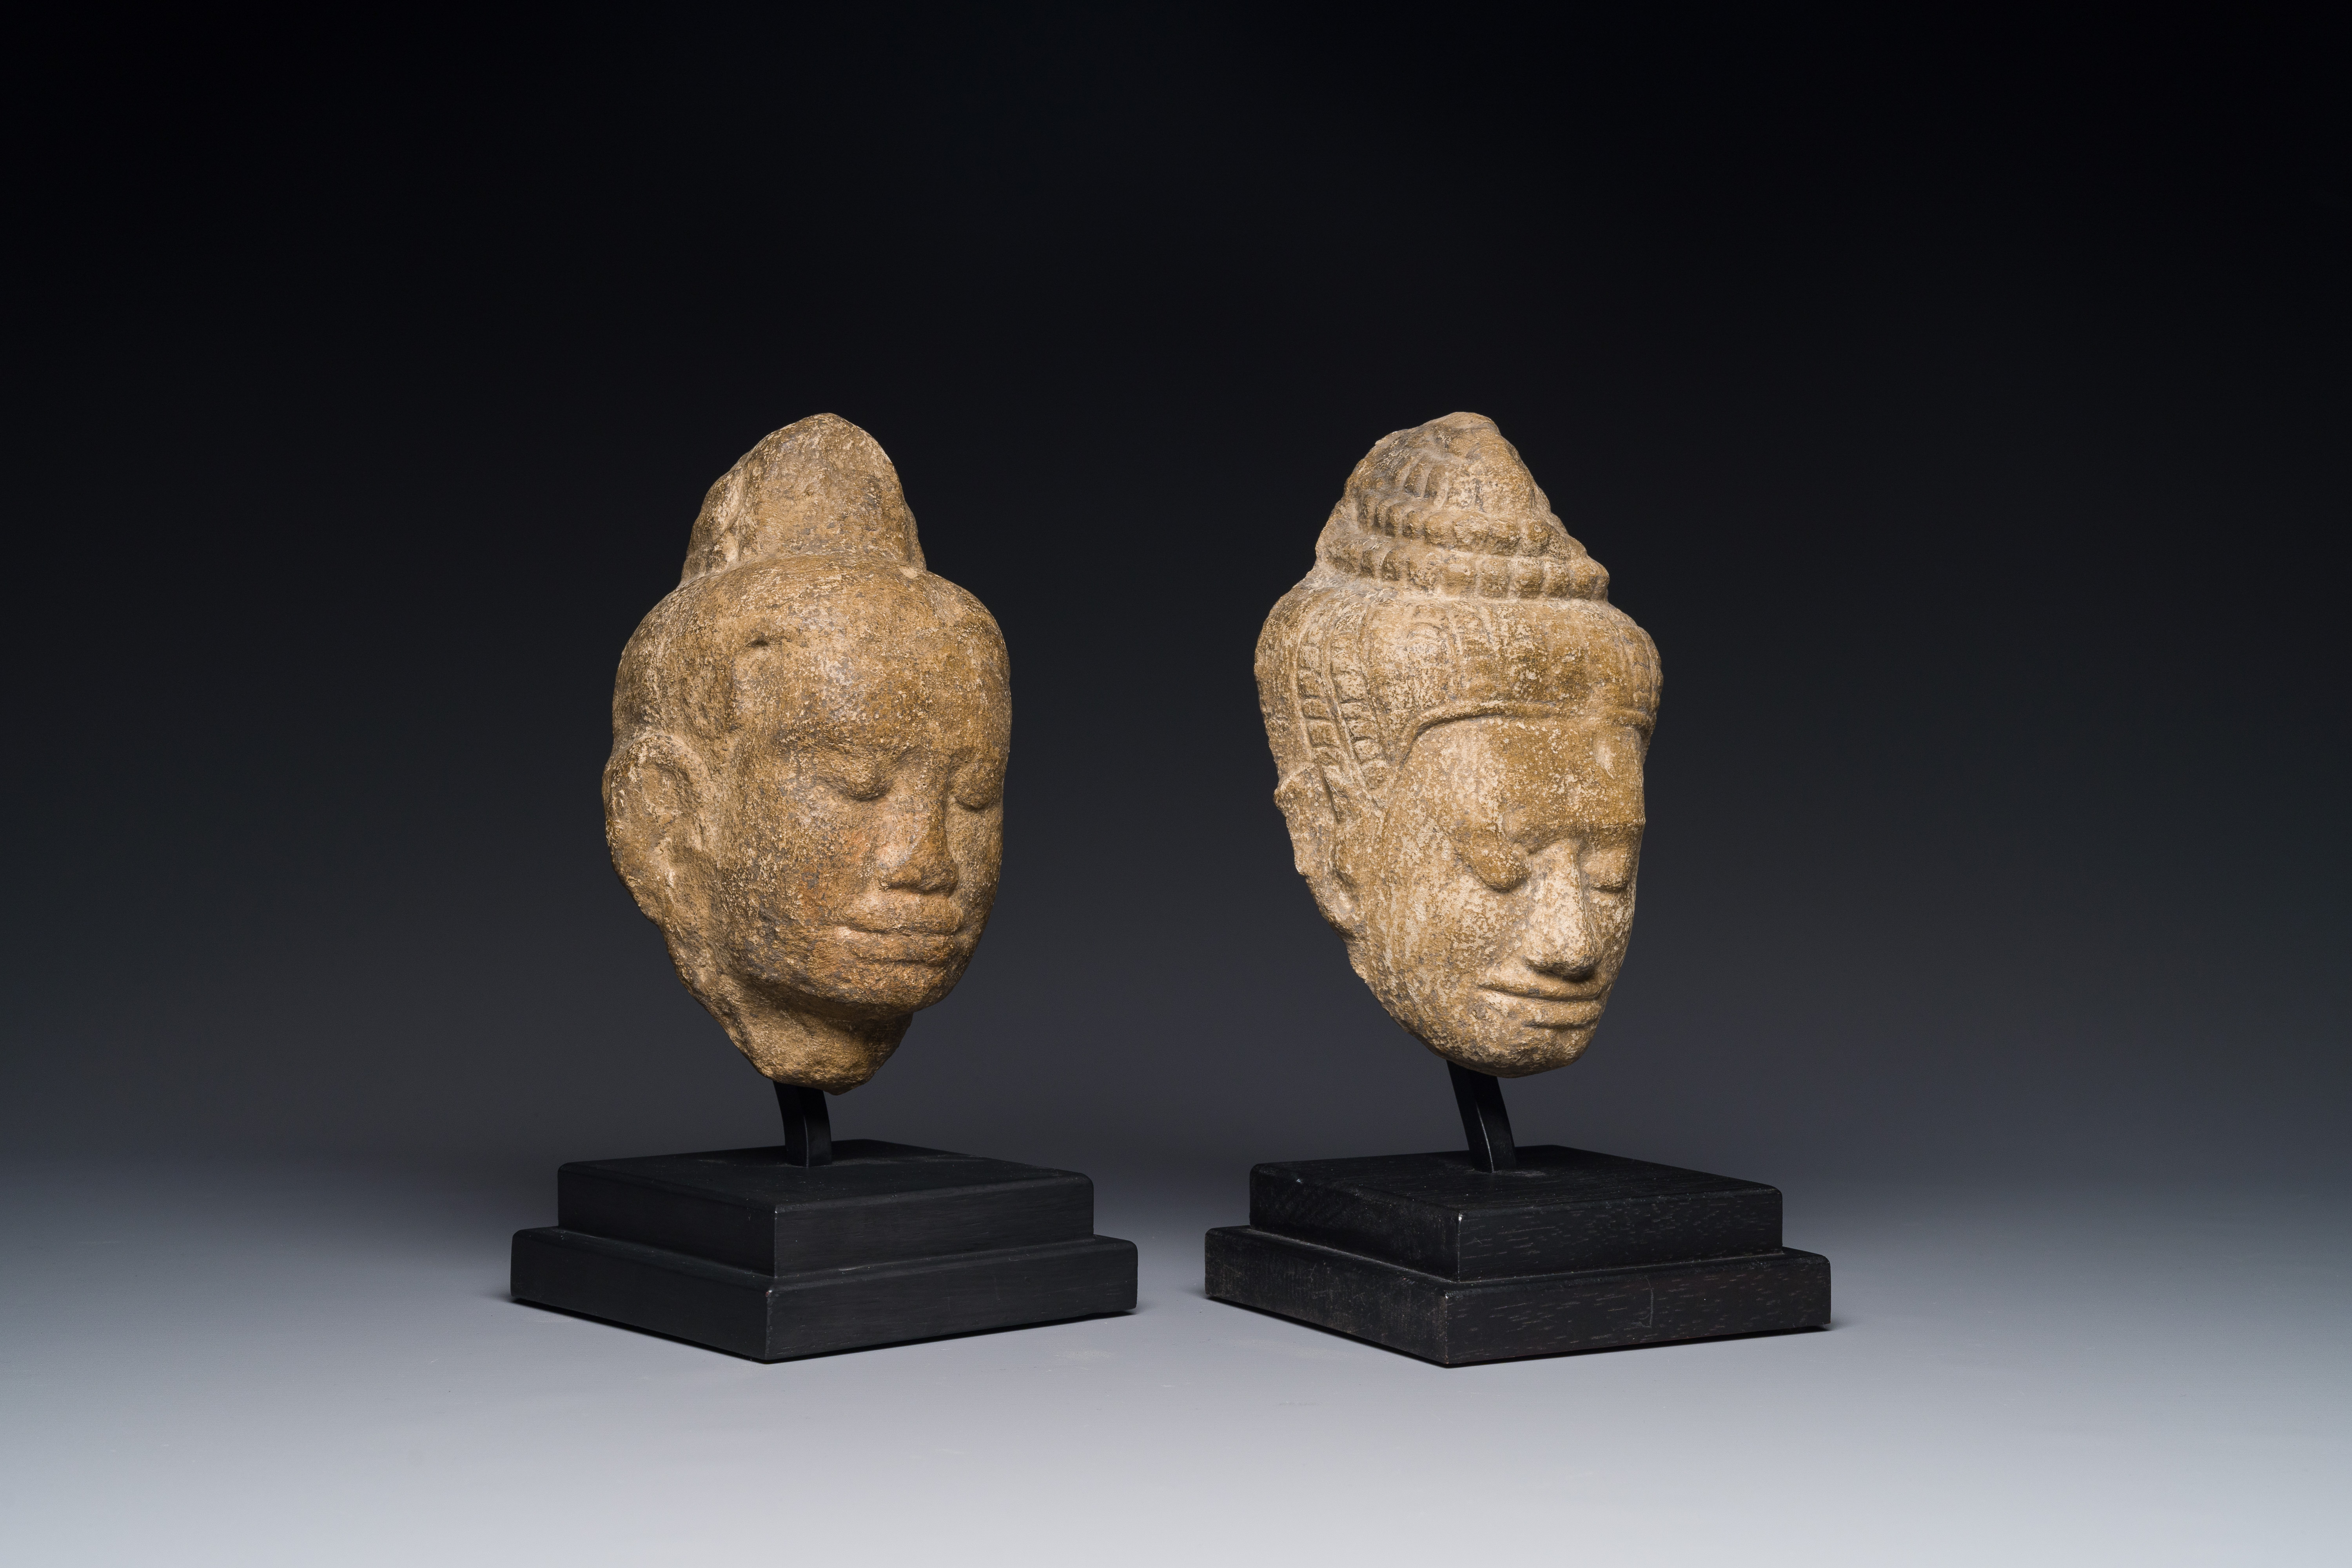 A stone head of Buddha and a sandstone khmer head of a deity, Bayon style, Cambodia, 12/13th C. - Image 3 of 12